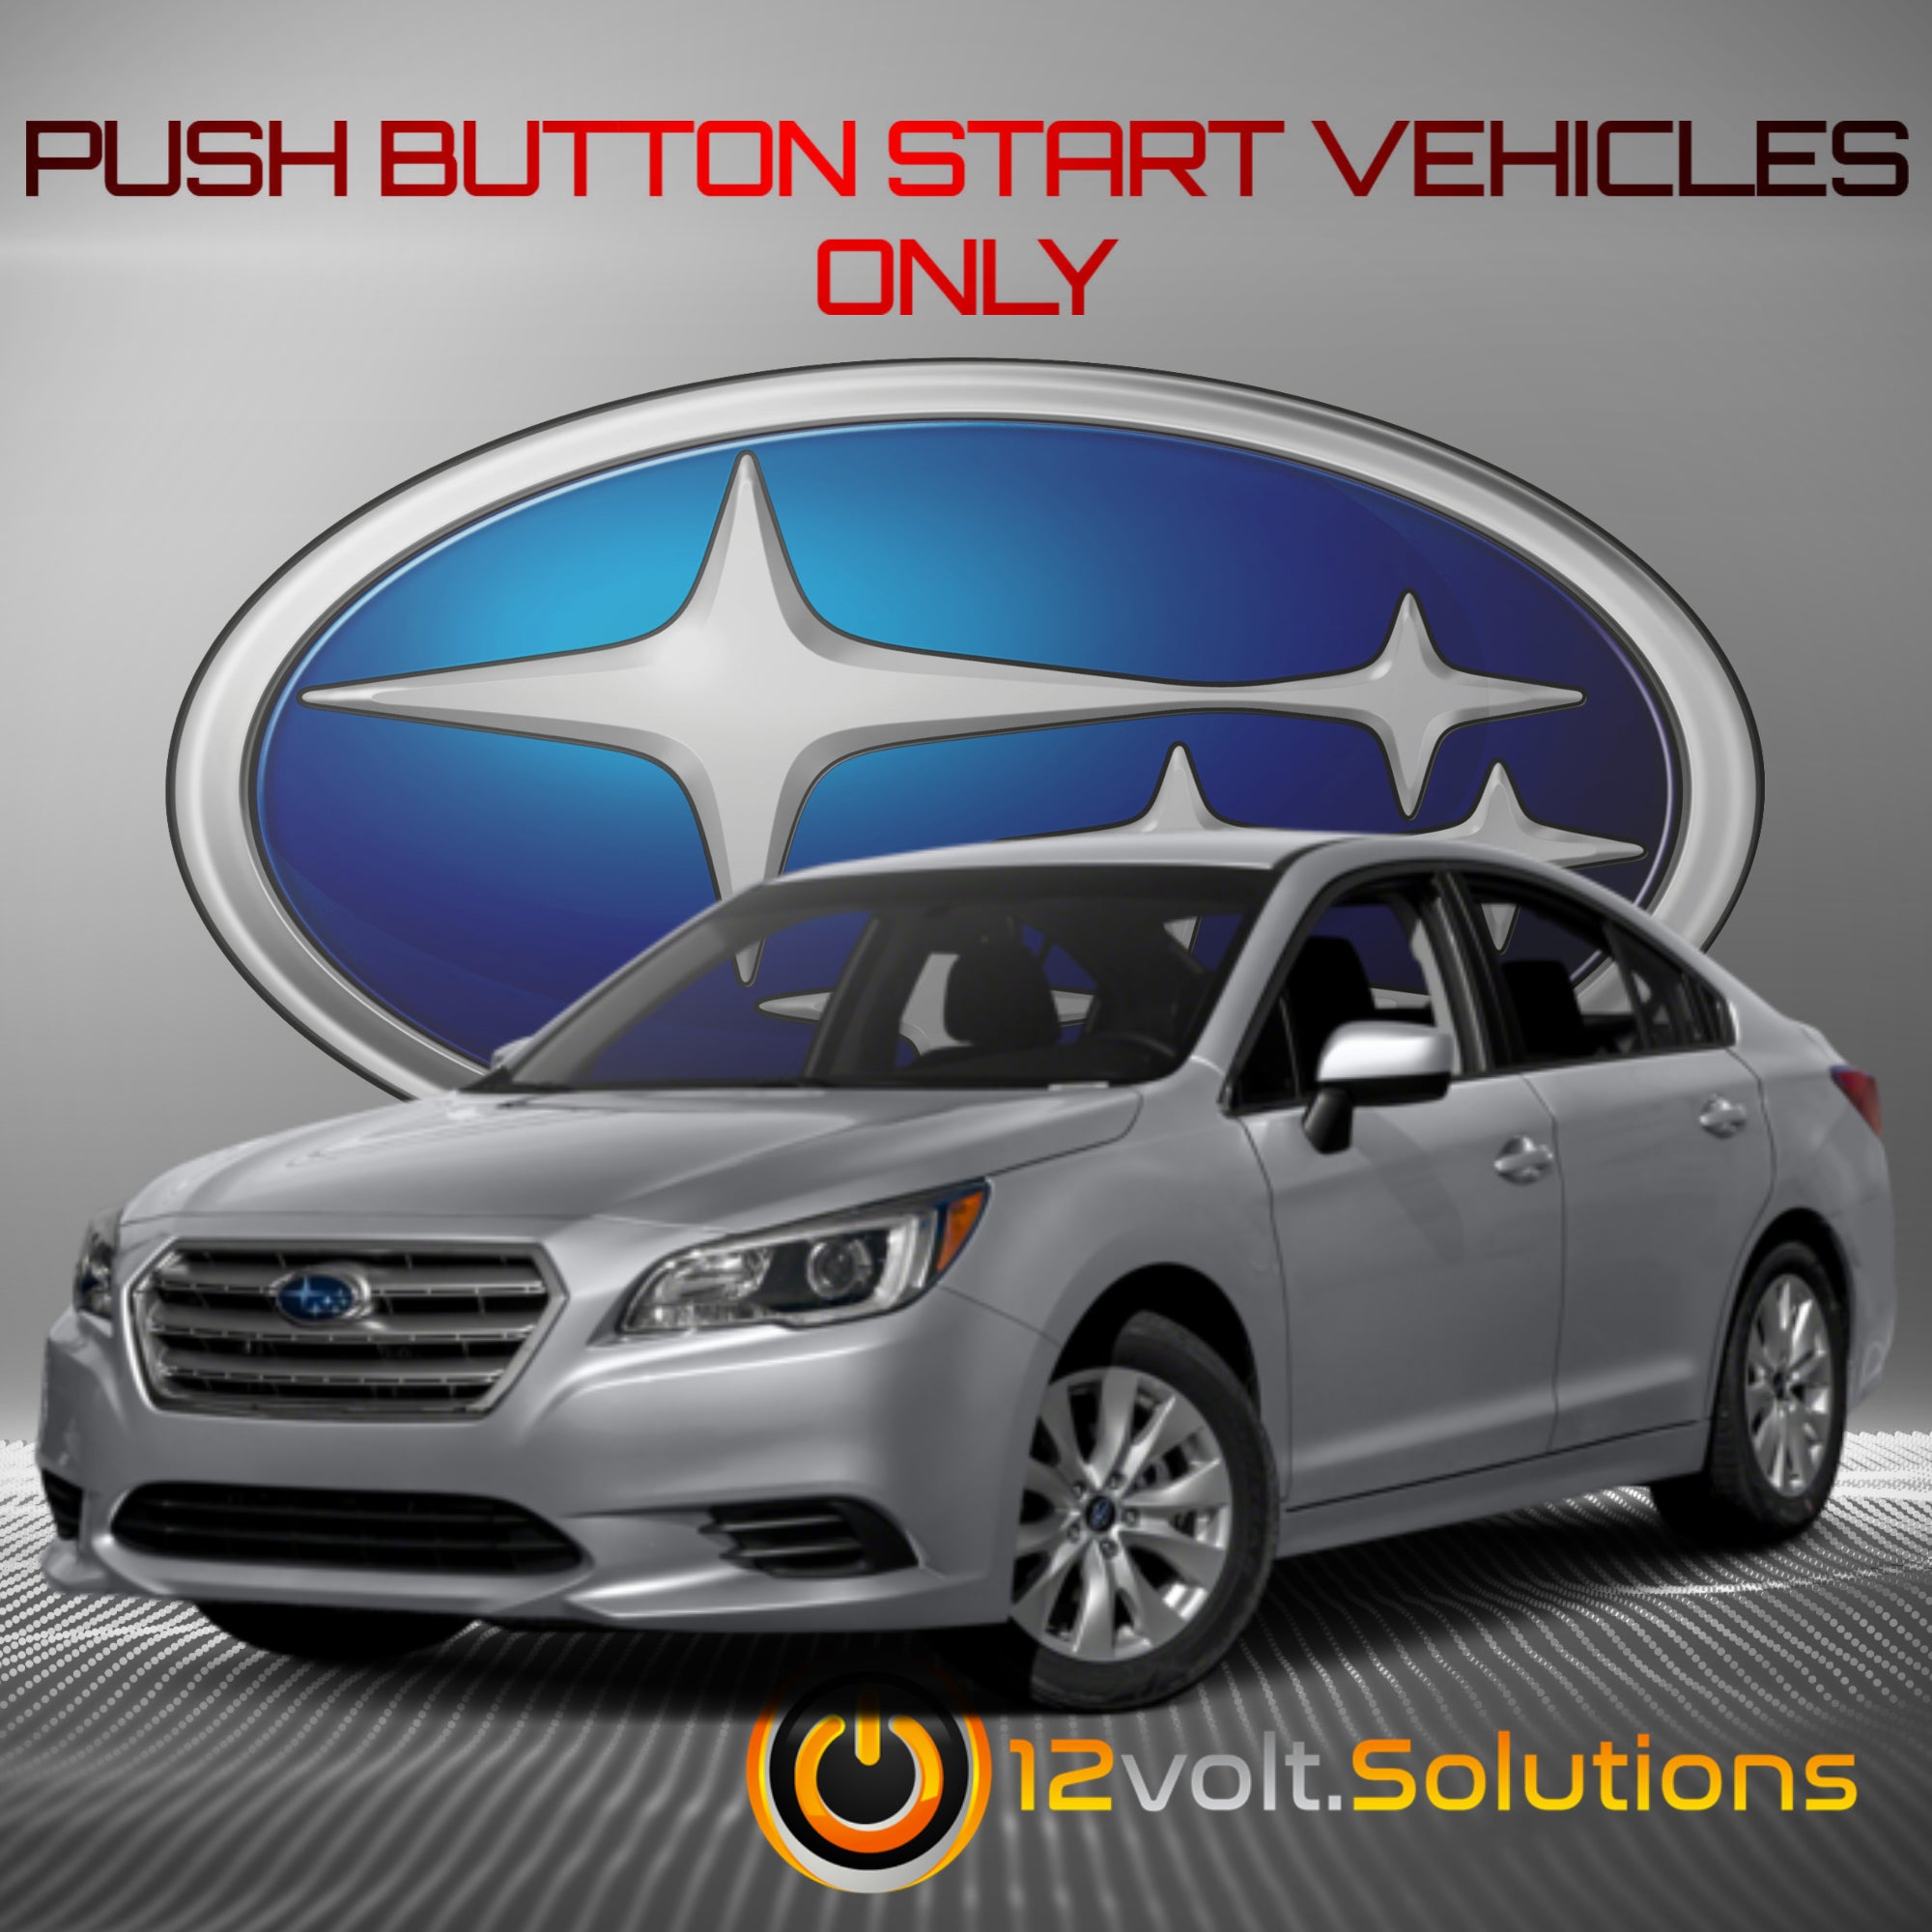 2013-2014 Subaru Legacy Plug and Play Remote Start Kit (Push Button Start)-12Volt.Solutions